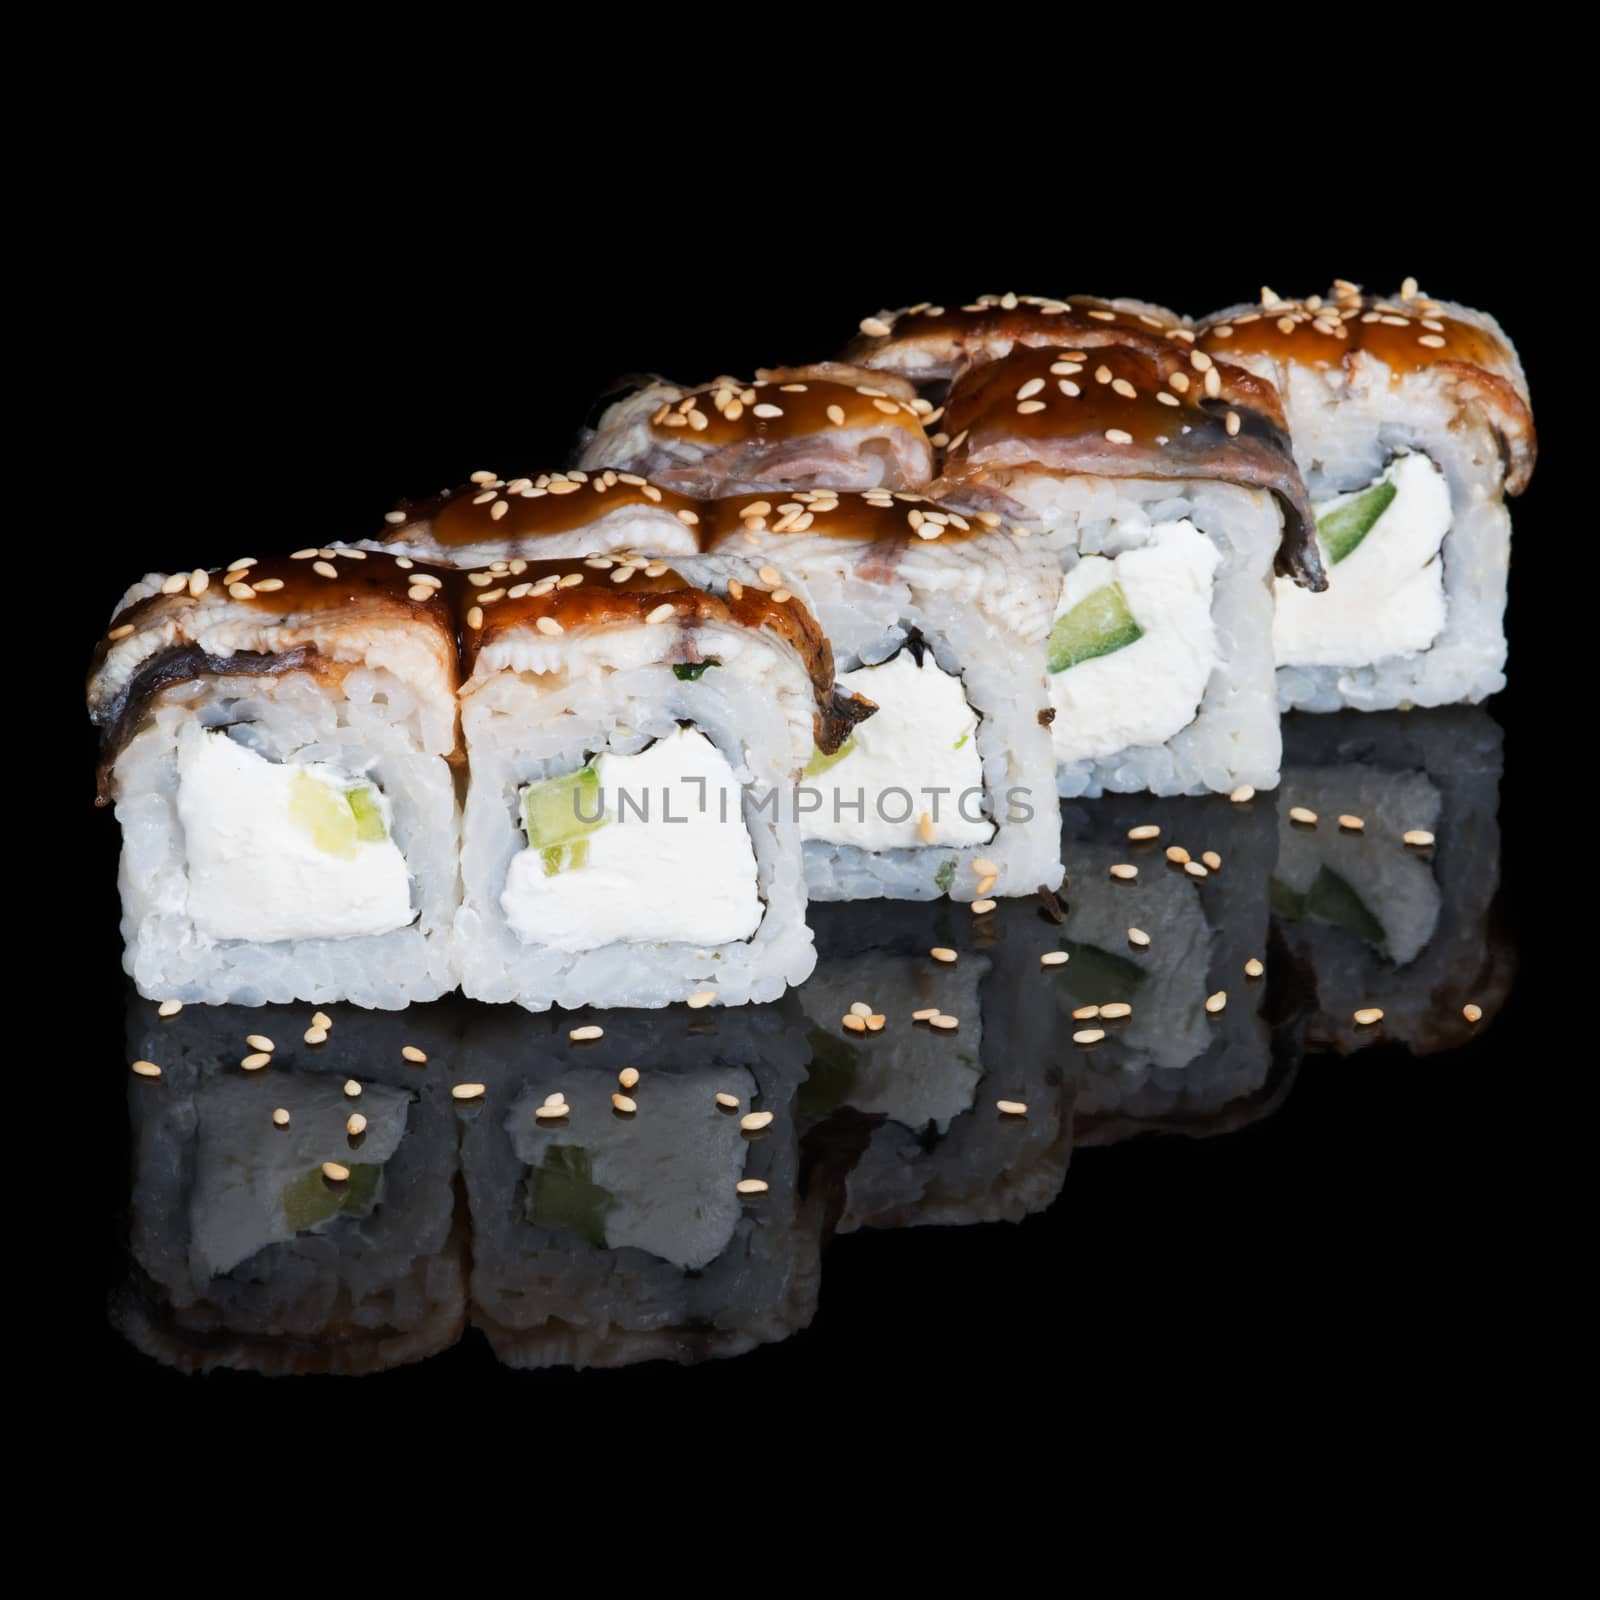 Sushi rolls with eel, cucumber and soft cheese by kzen